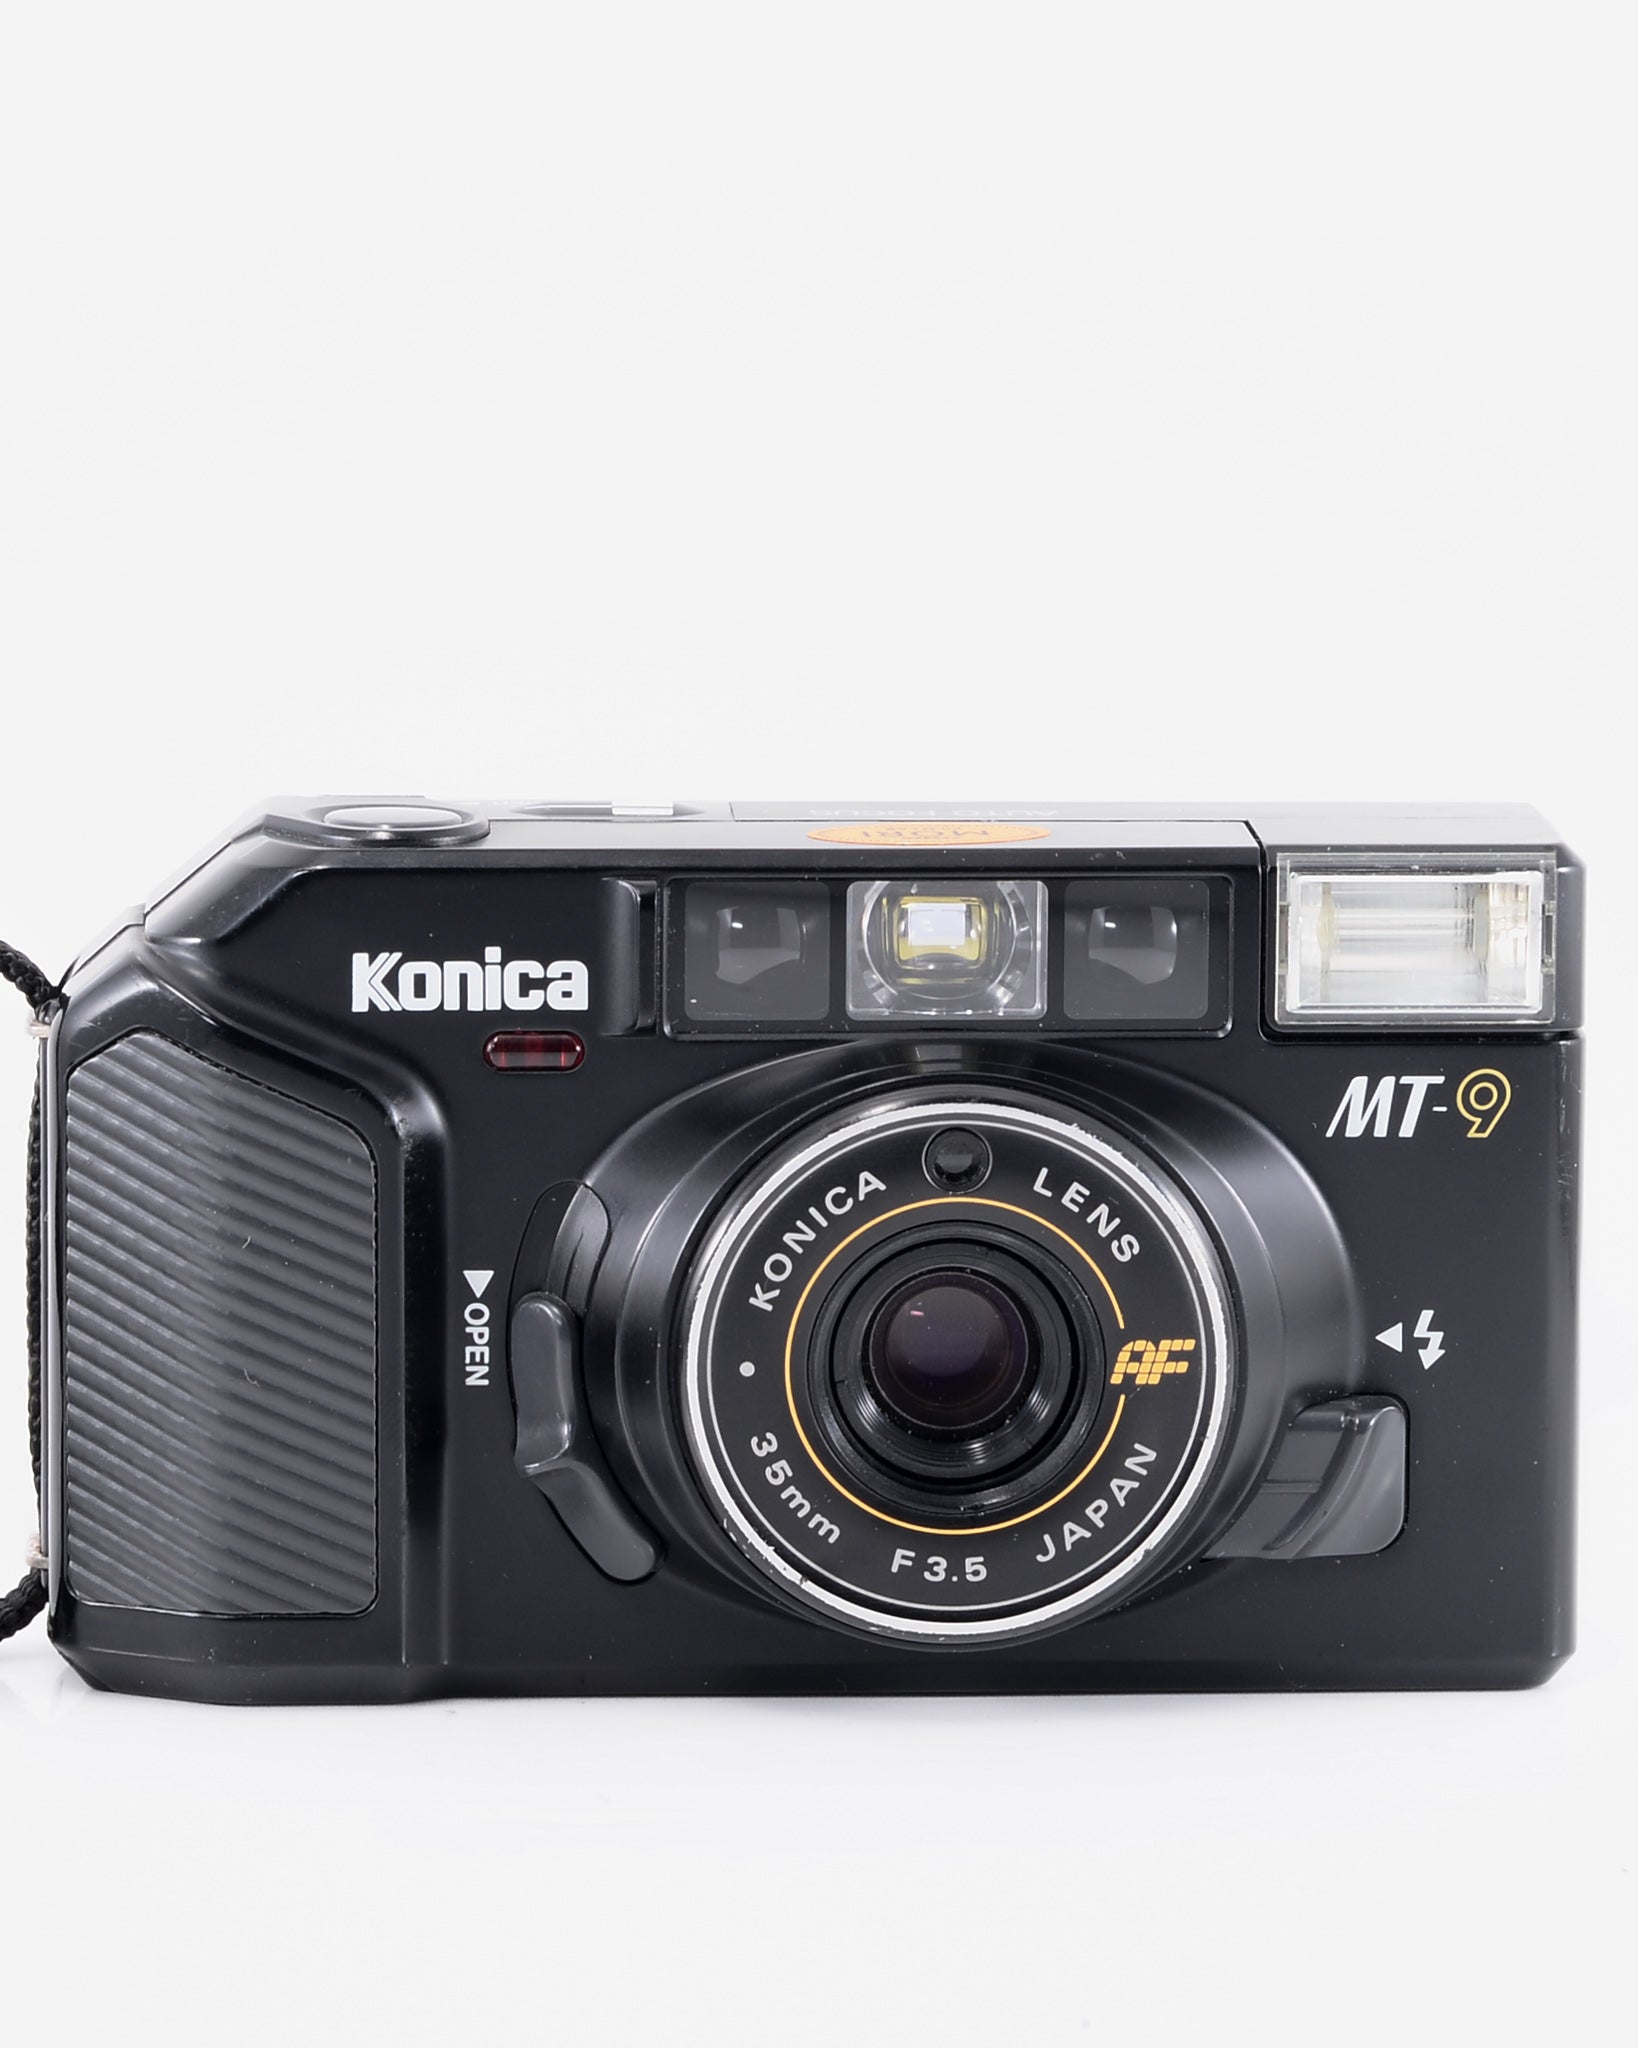 Konica MT-9 35mm Point & Shoot Film Camera with 35mm f3.5 Lens